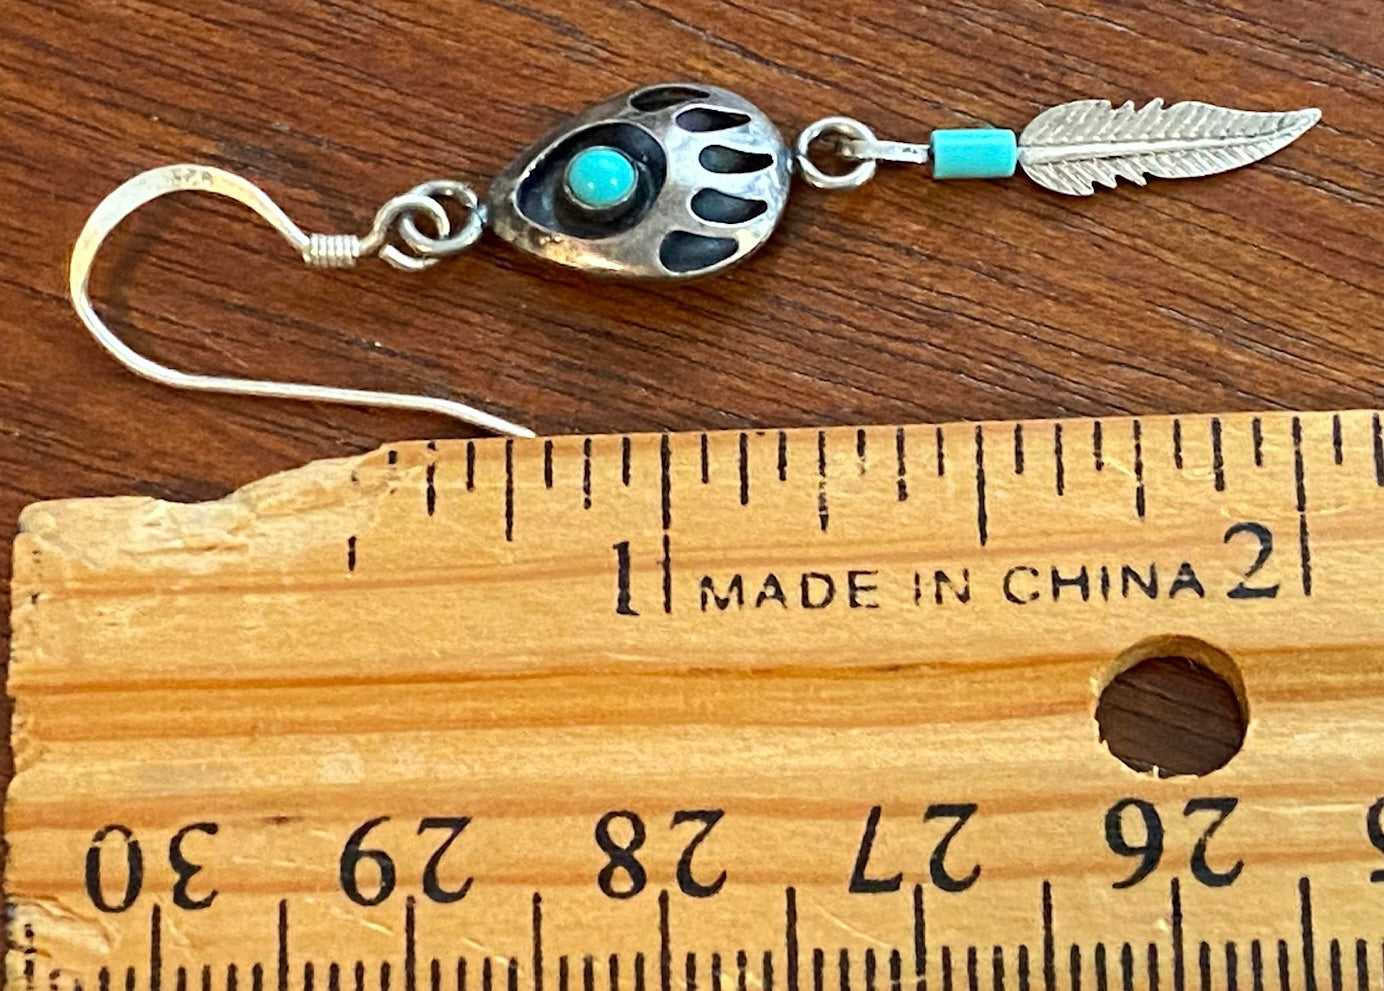 Sterling Silver 925 Turquoise Feather Bear Claw Drop Dangly Earrings